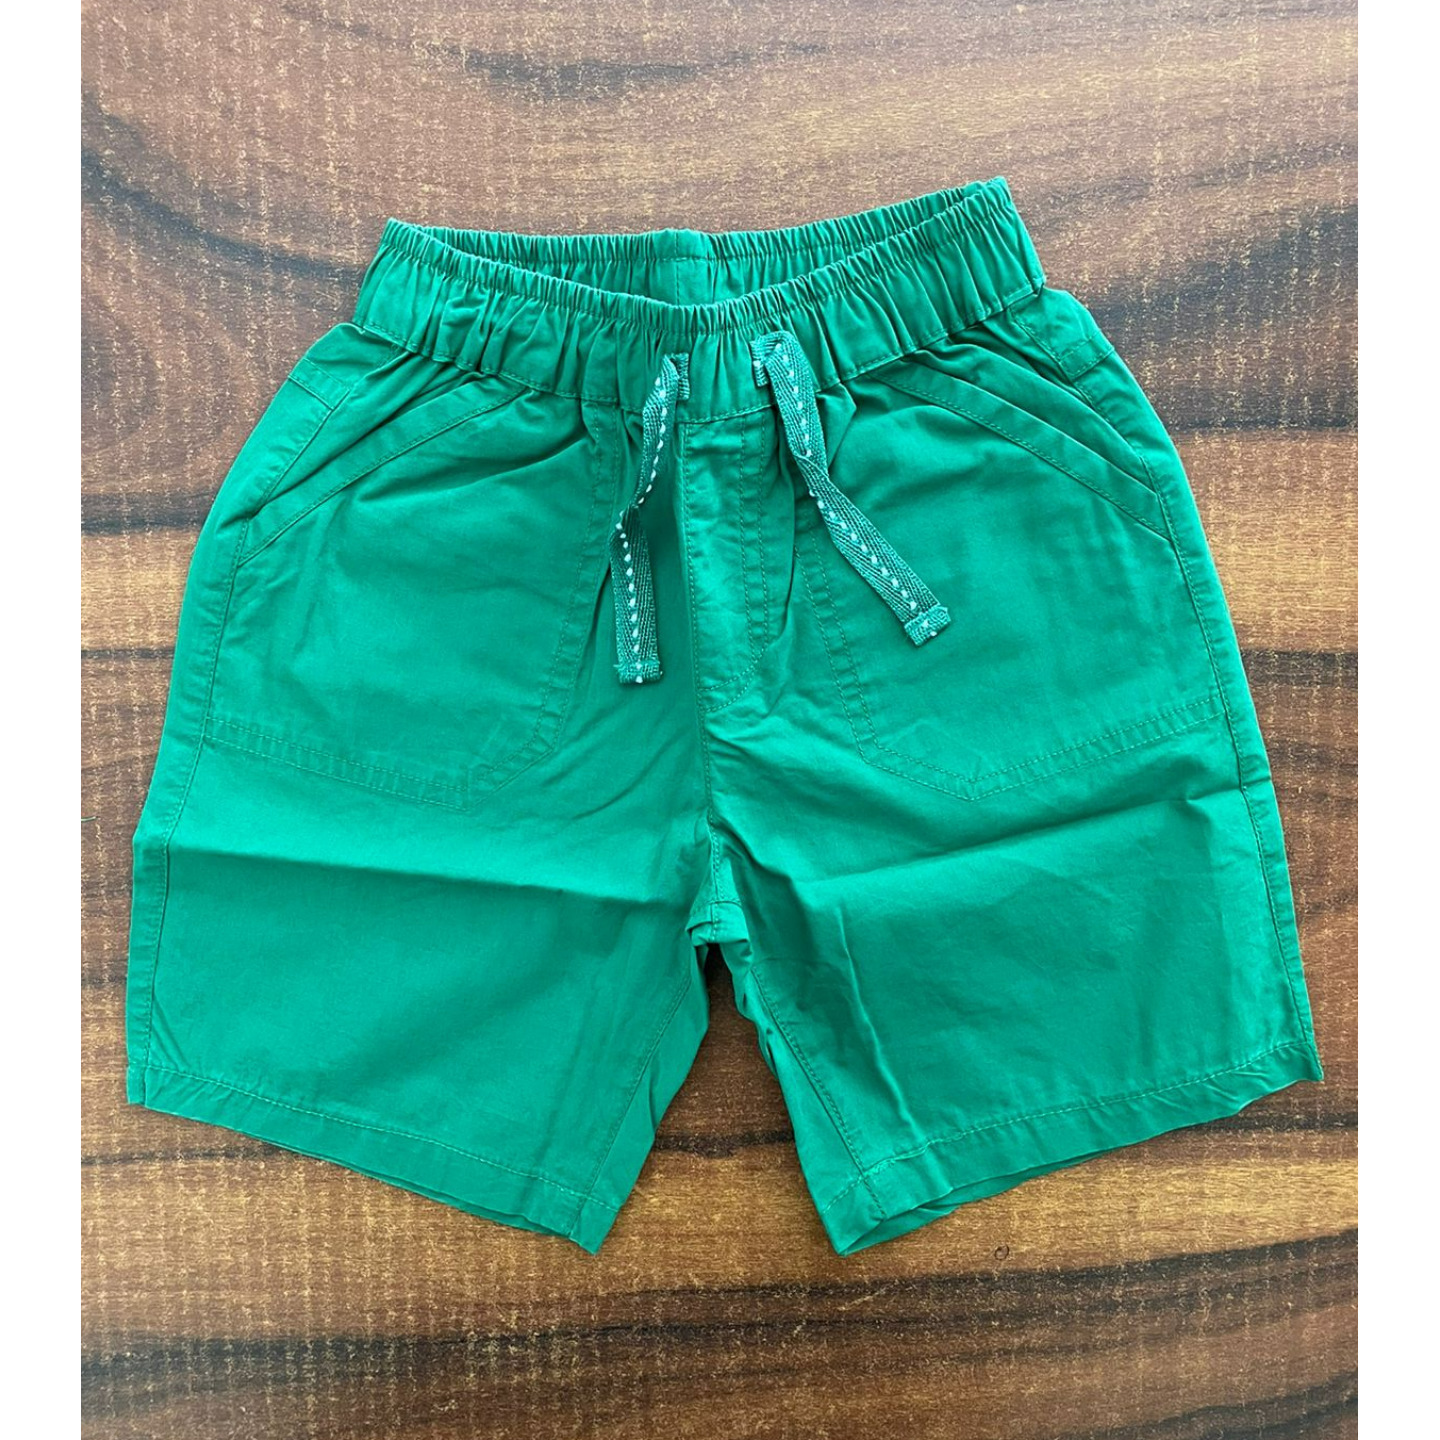 Cucumber NikarShorts Rs 220 Only Made In India Small Size 0 to 6 Months